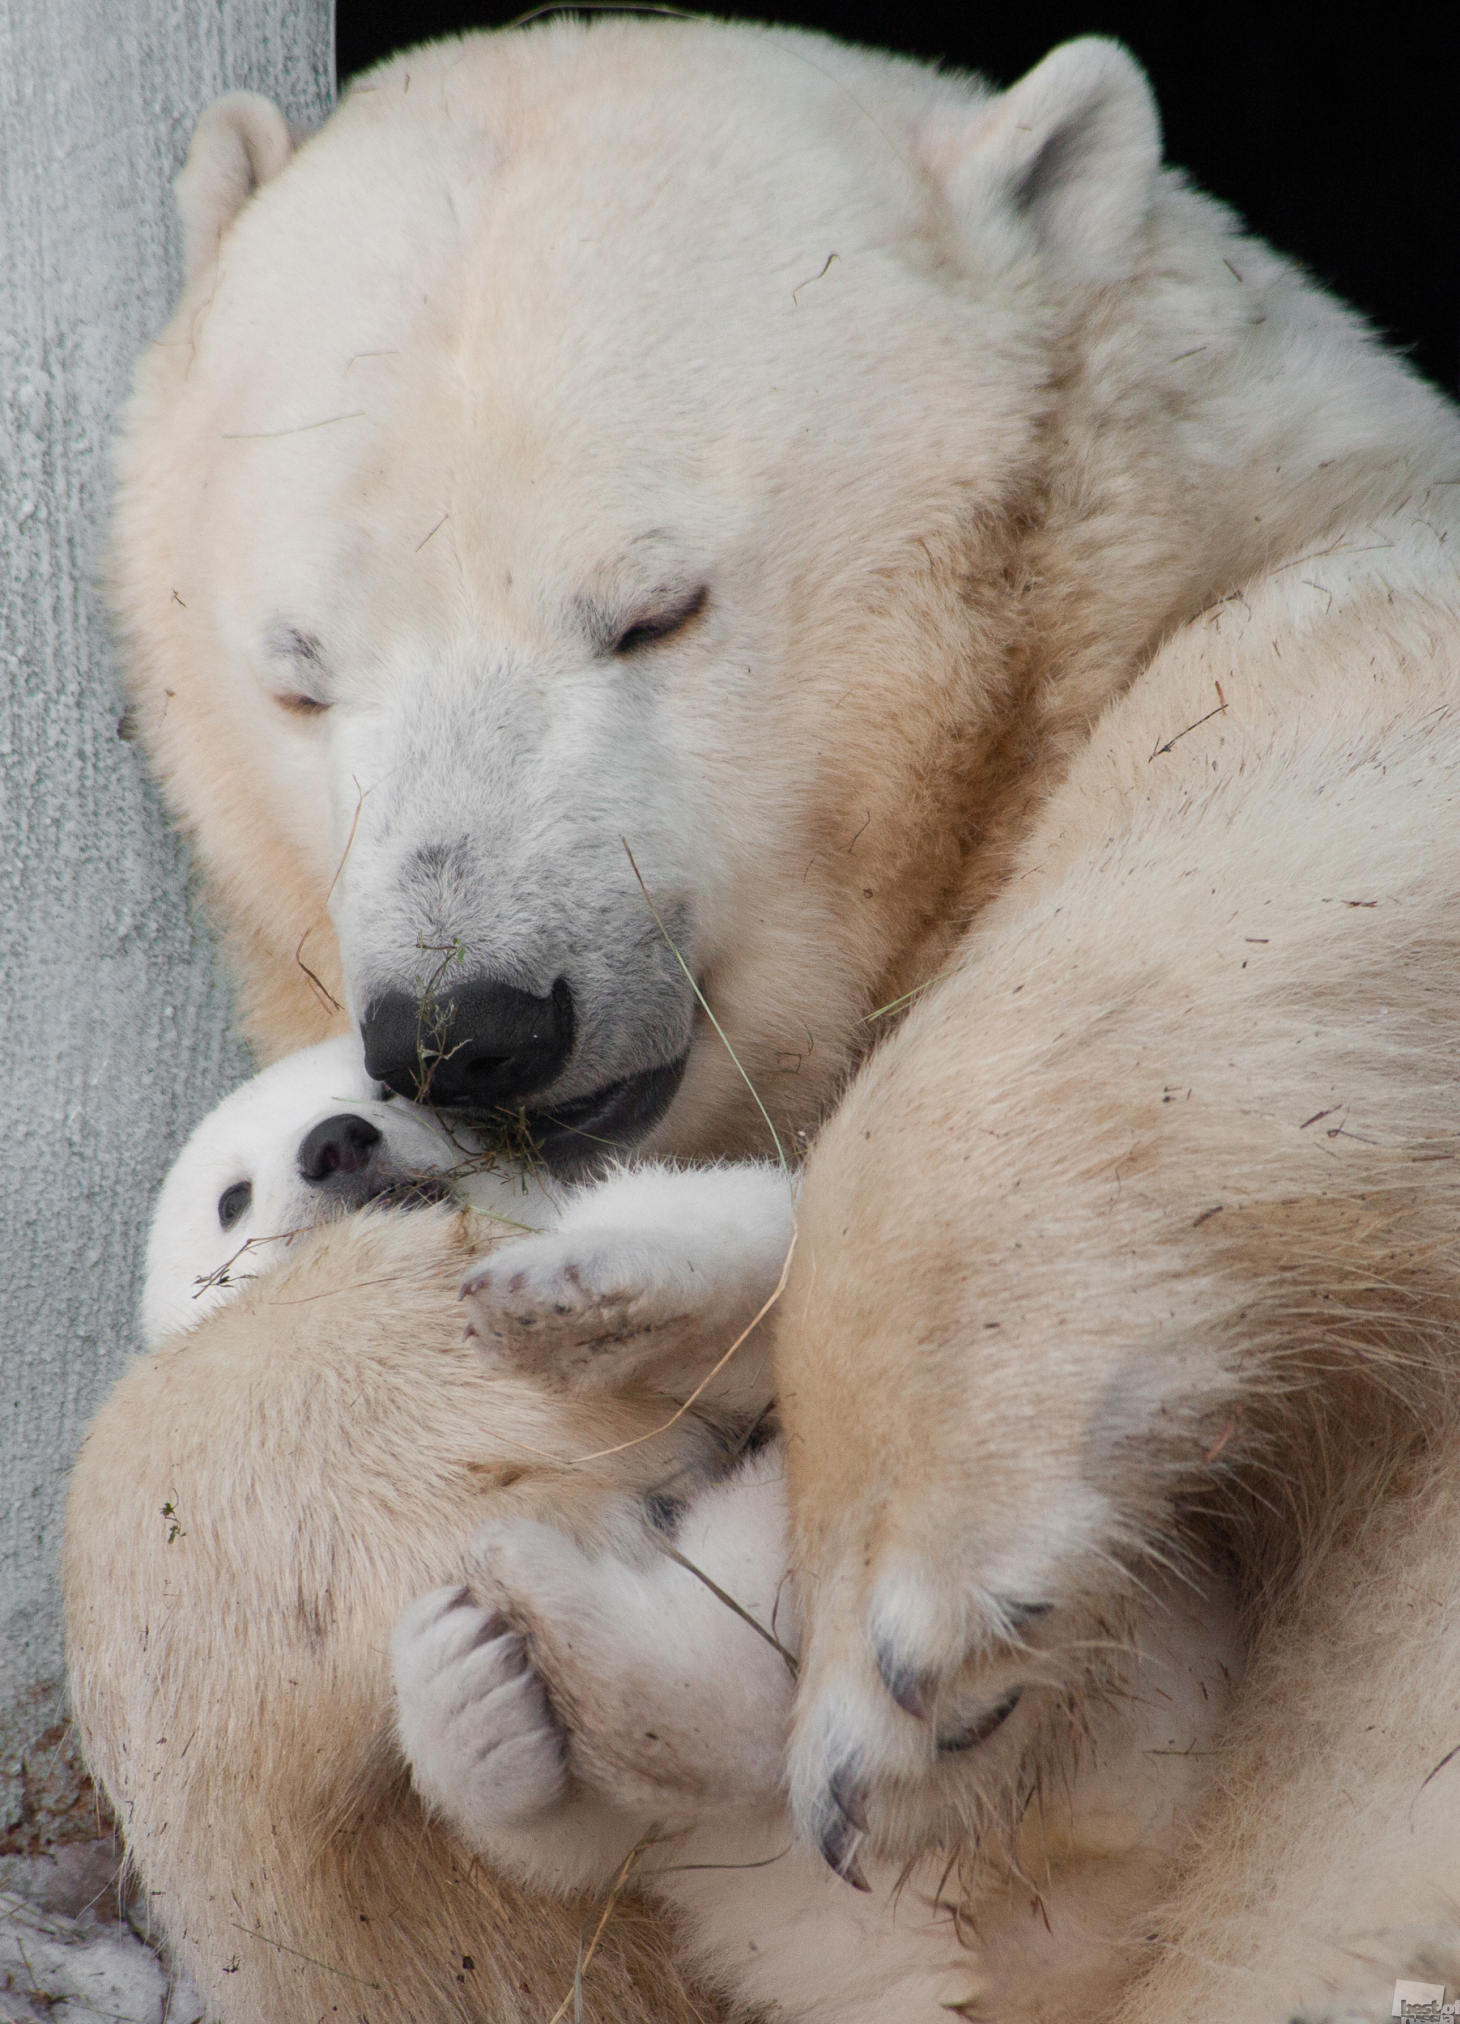 The birth of a white bear for the first time in 42 years is an important event in the life of Novosibirsk. The whole city was involved in the naming process, eventually opting to call him Shilka. Novosibirsk Oblast.